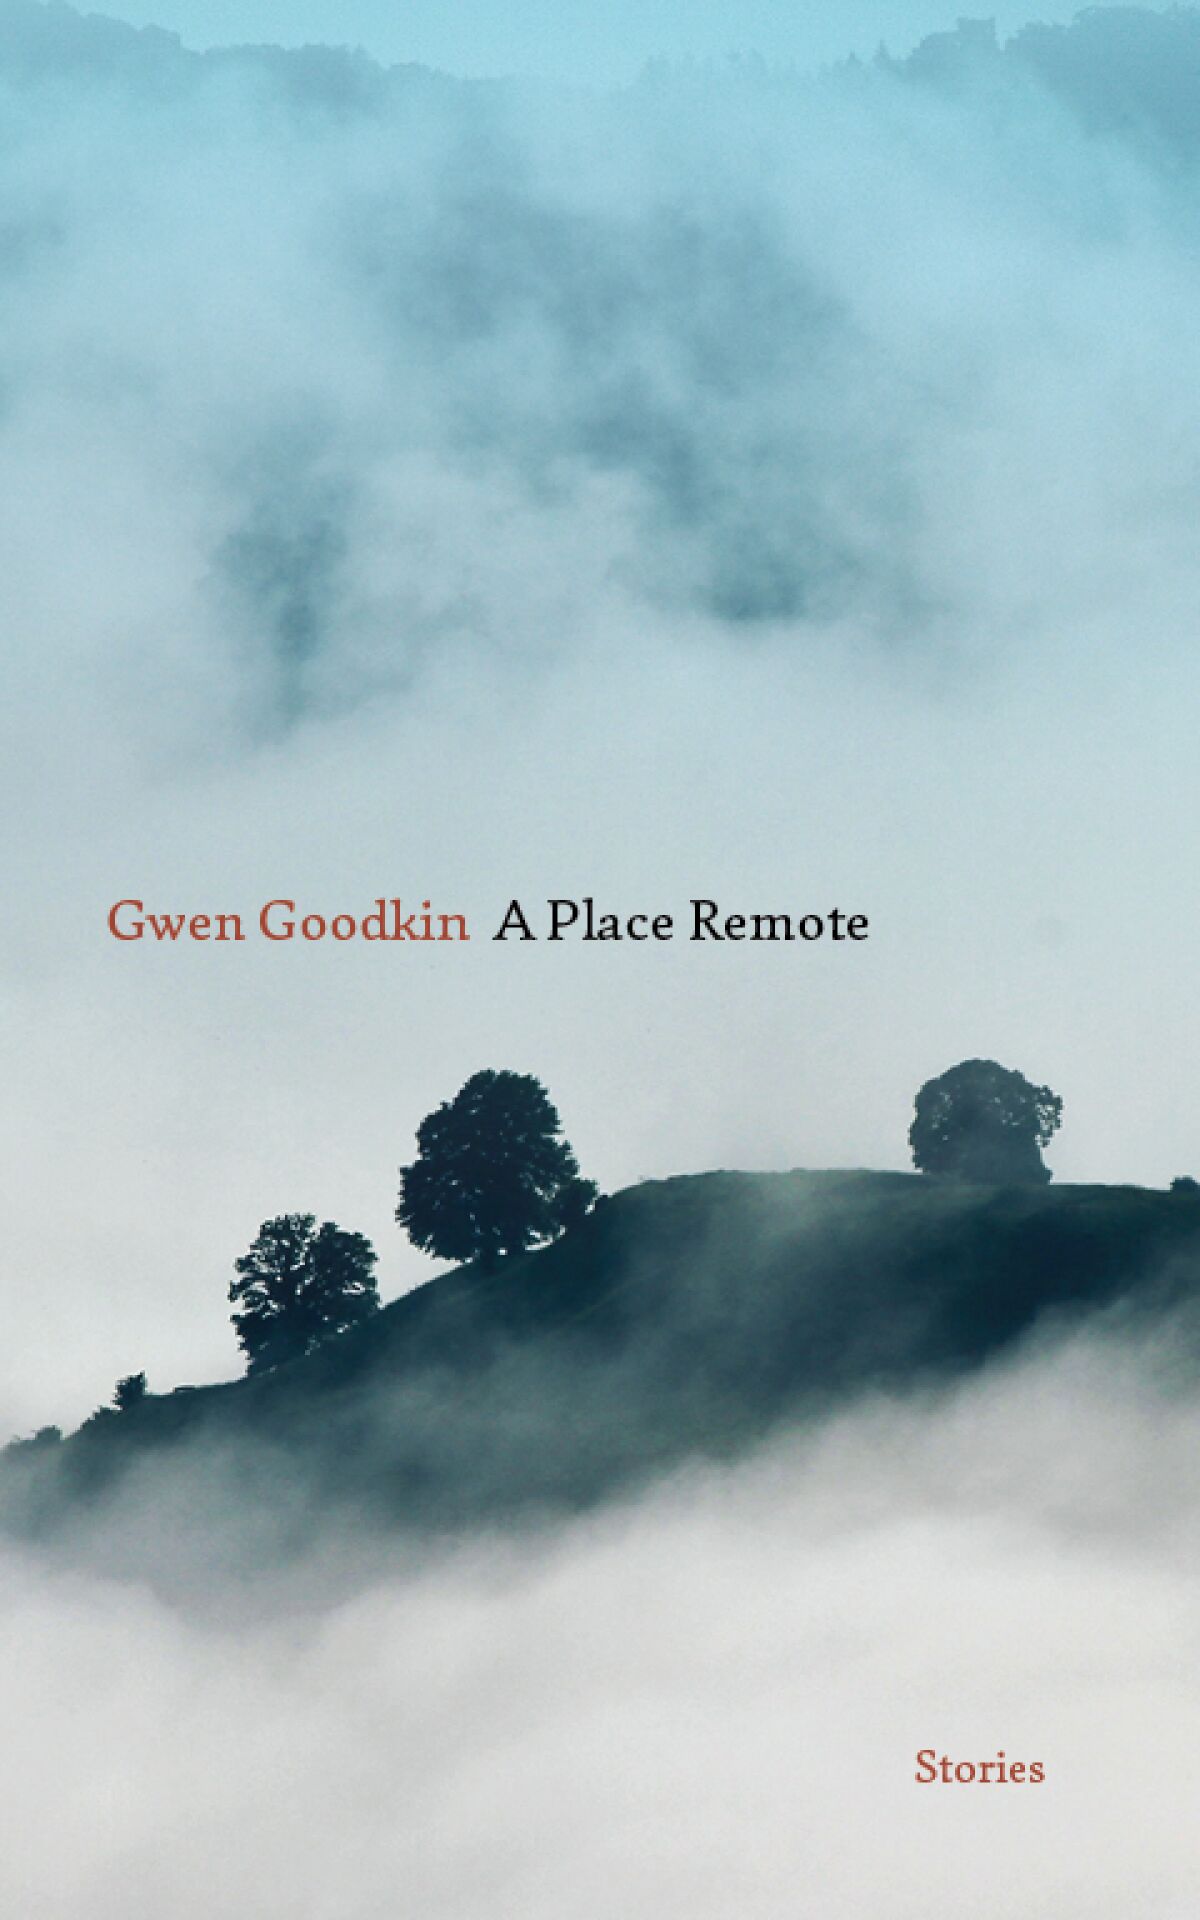 The cover of "A Place Remote"